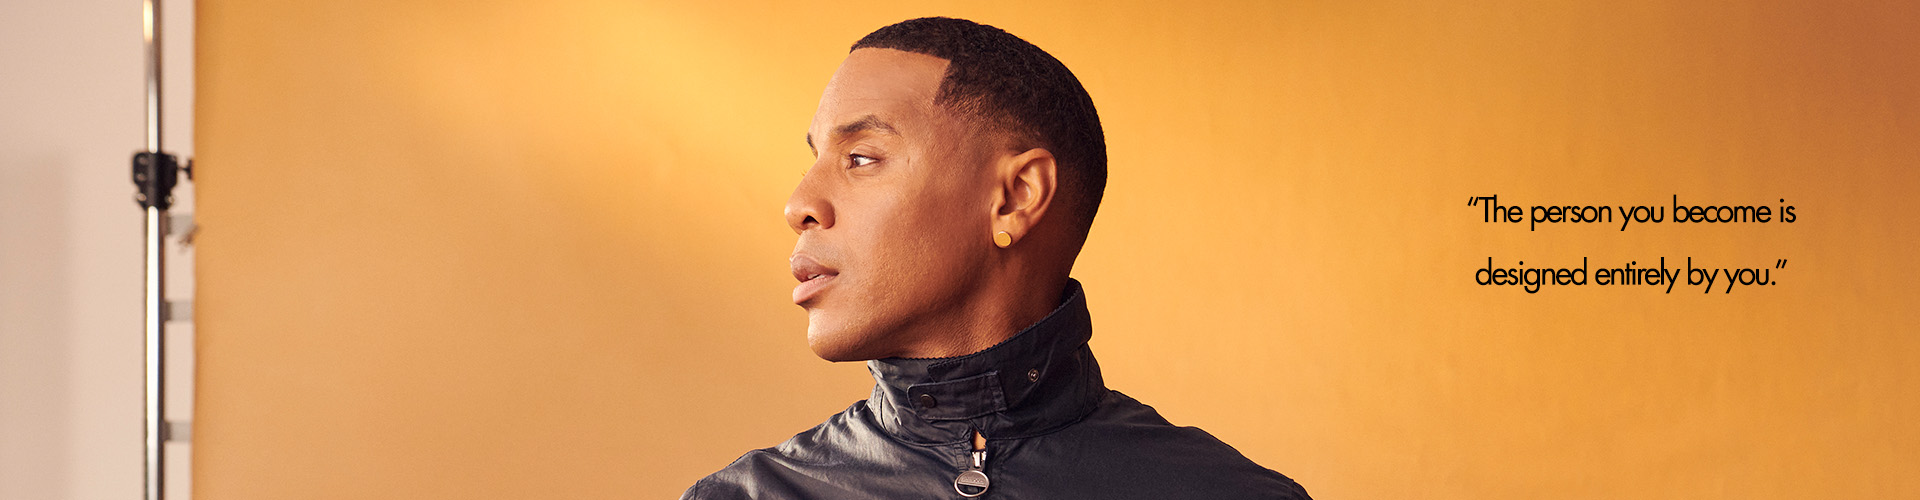 Original Chatter with Reggie Yates: Q&A 